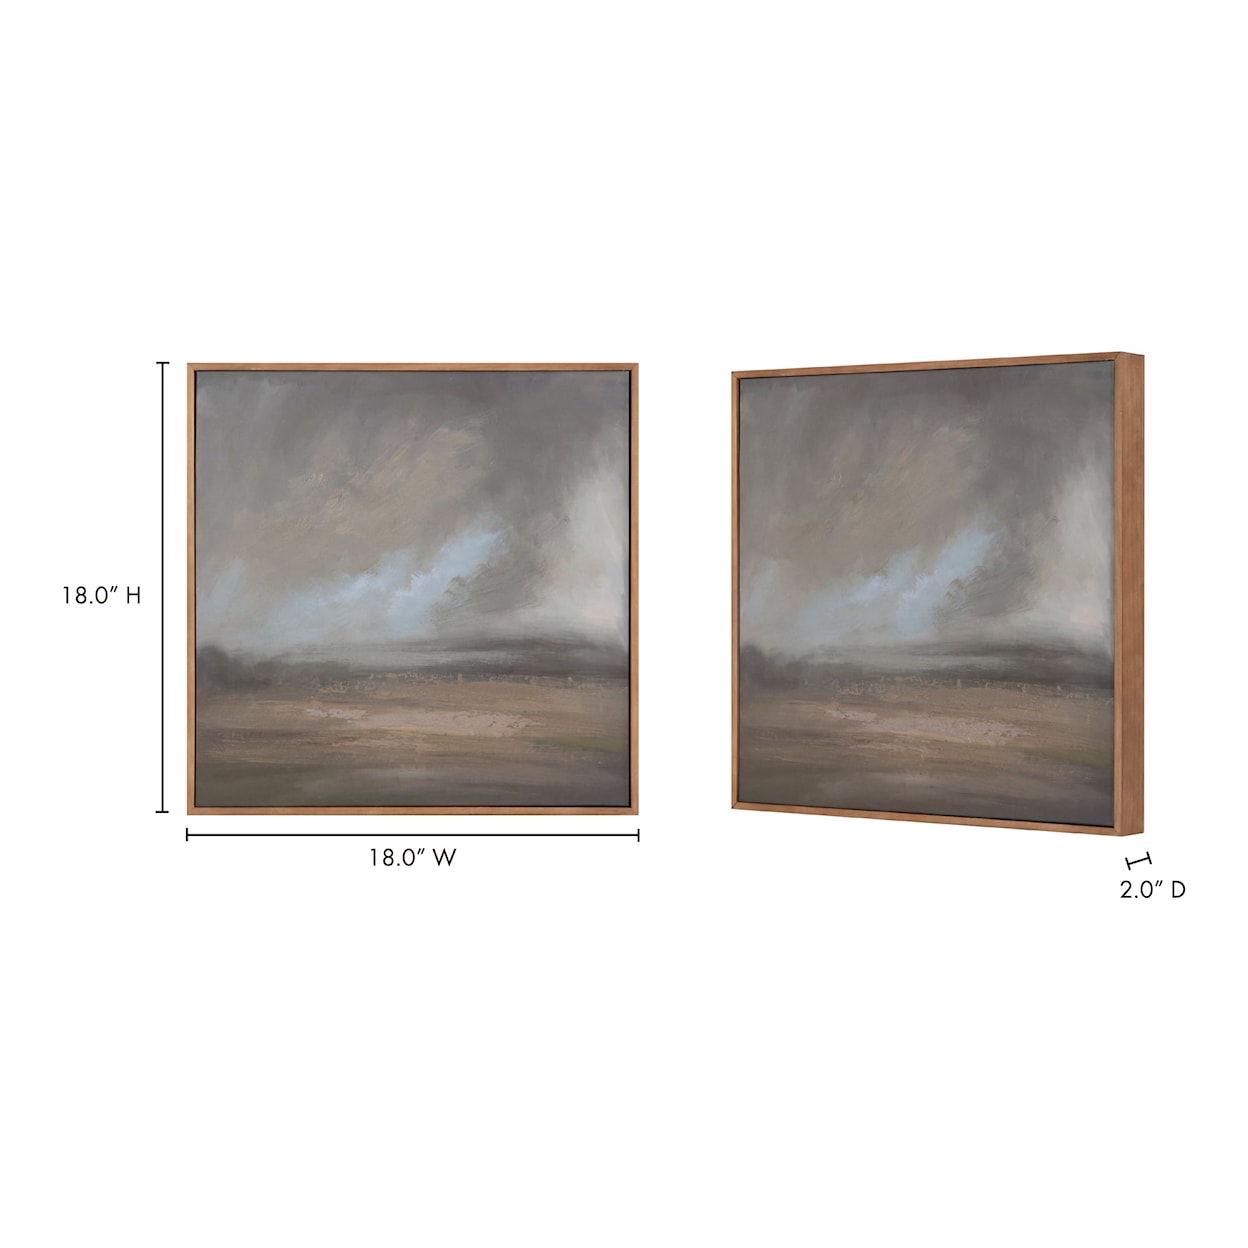 Moe's Home Collection Lulled Lulled Sky Framed Painting